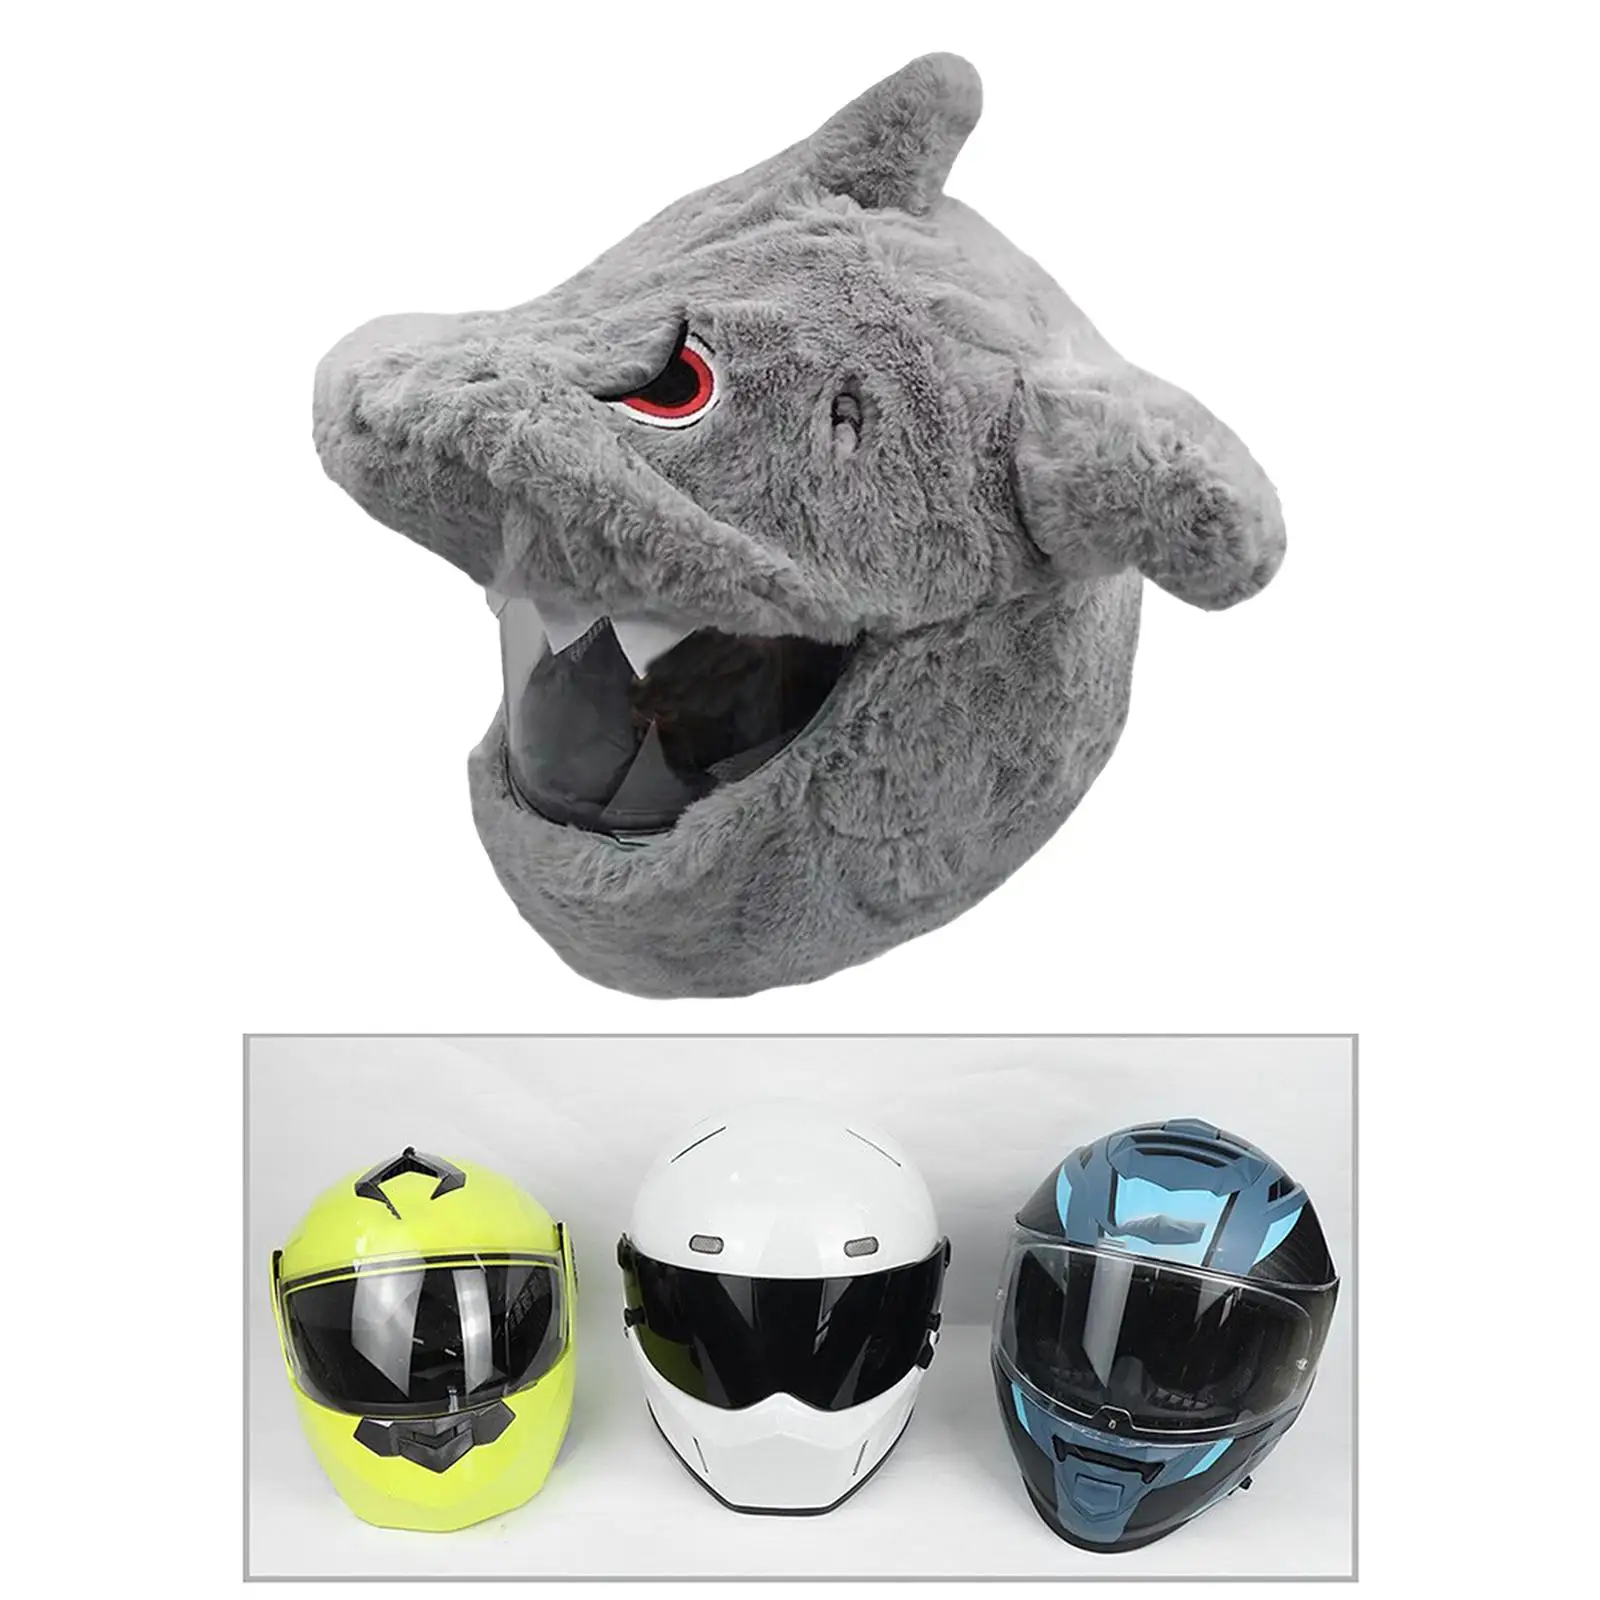 Motorcycle Helmet Cover Fun Riding and Gifts Moto Gear Dust Cap Warm Cute Furry Helmet Cover for Outdoor Riding Men Adults